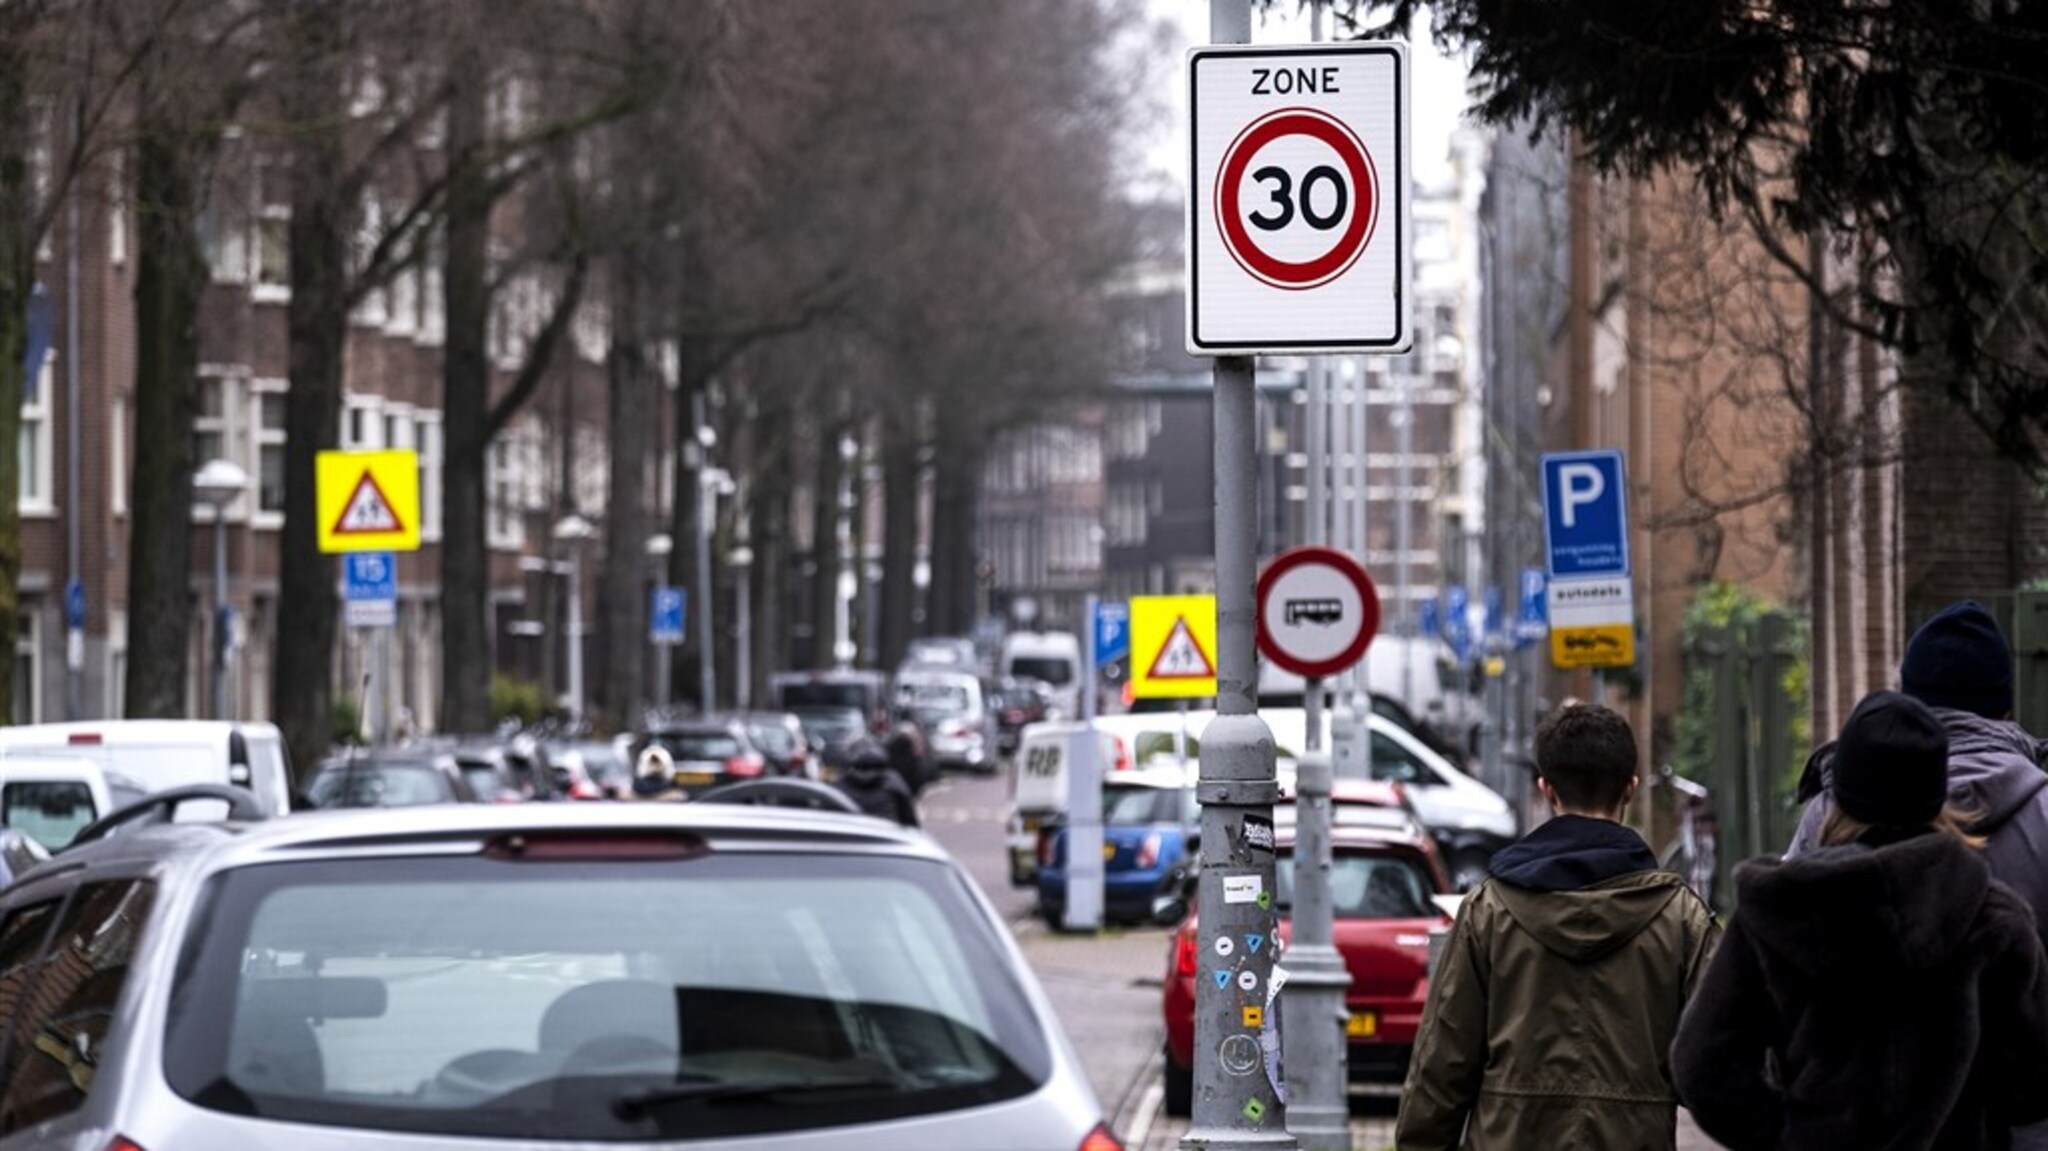 "Big cities want a maximum of 30 km/h inside built-up areas"